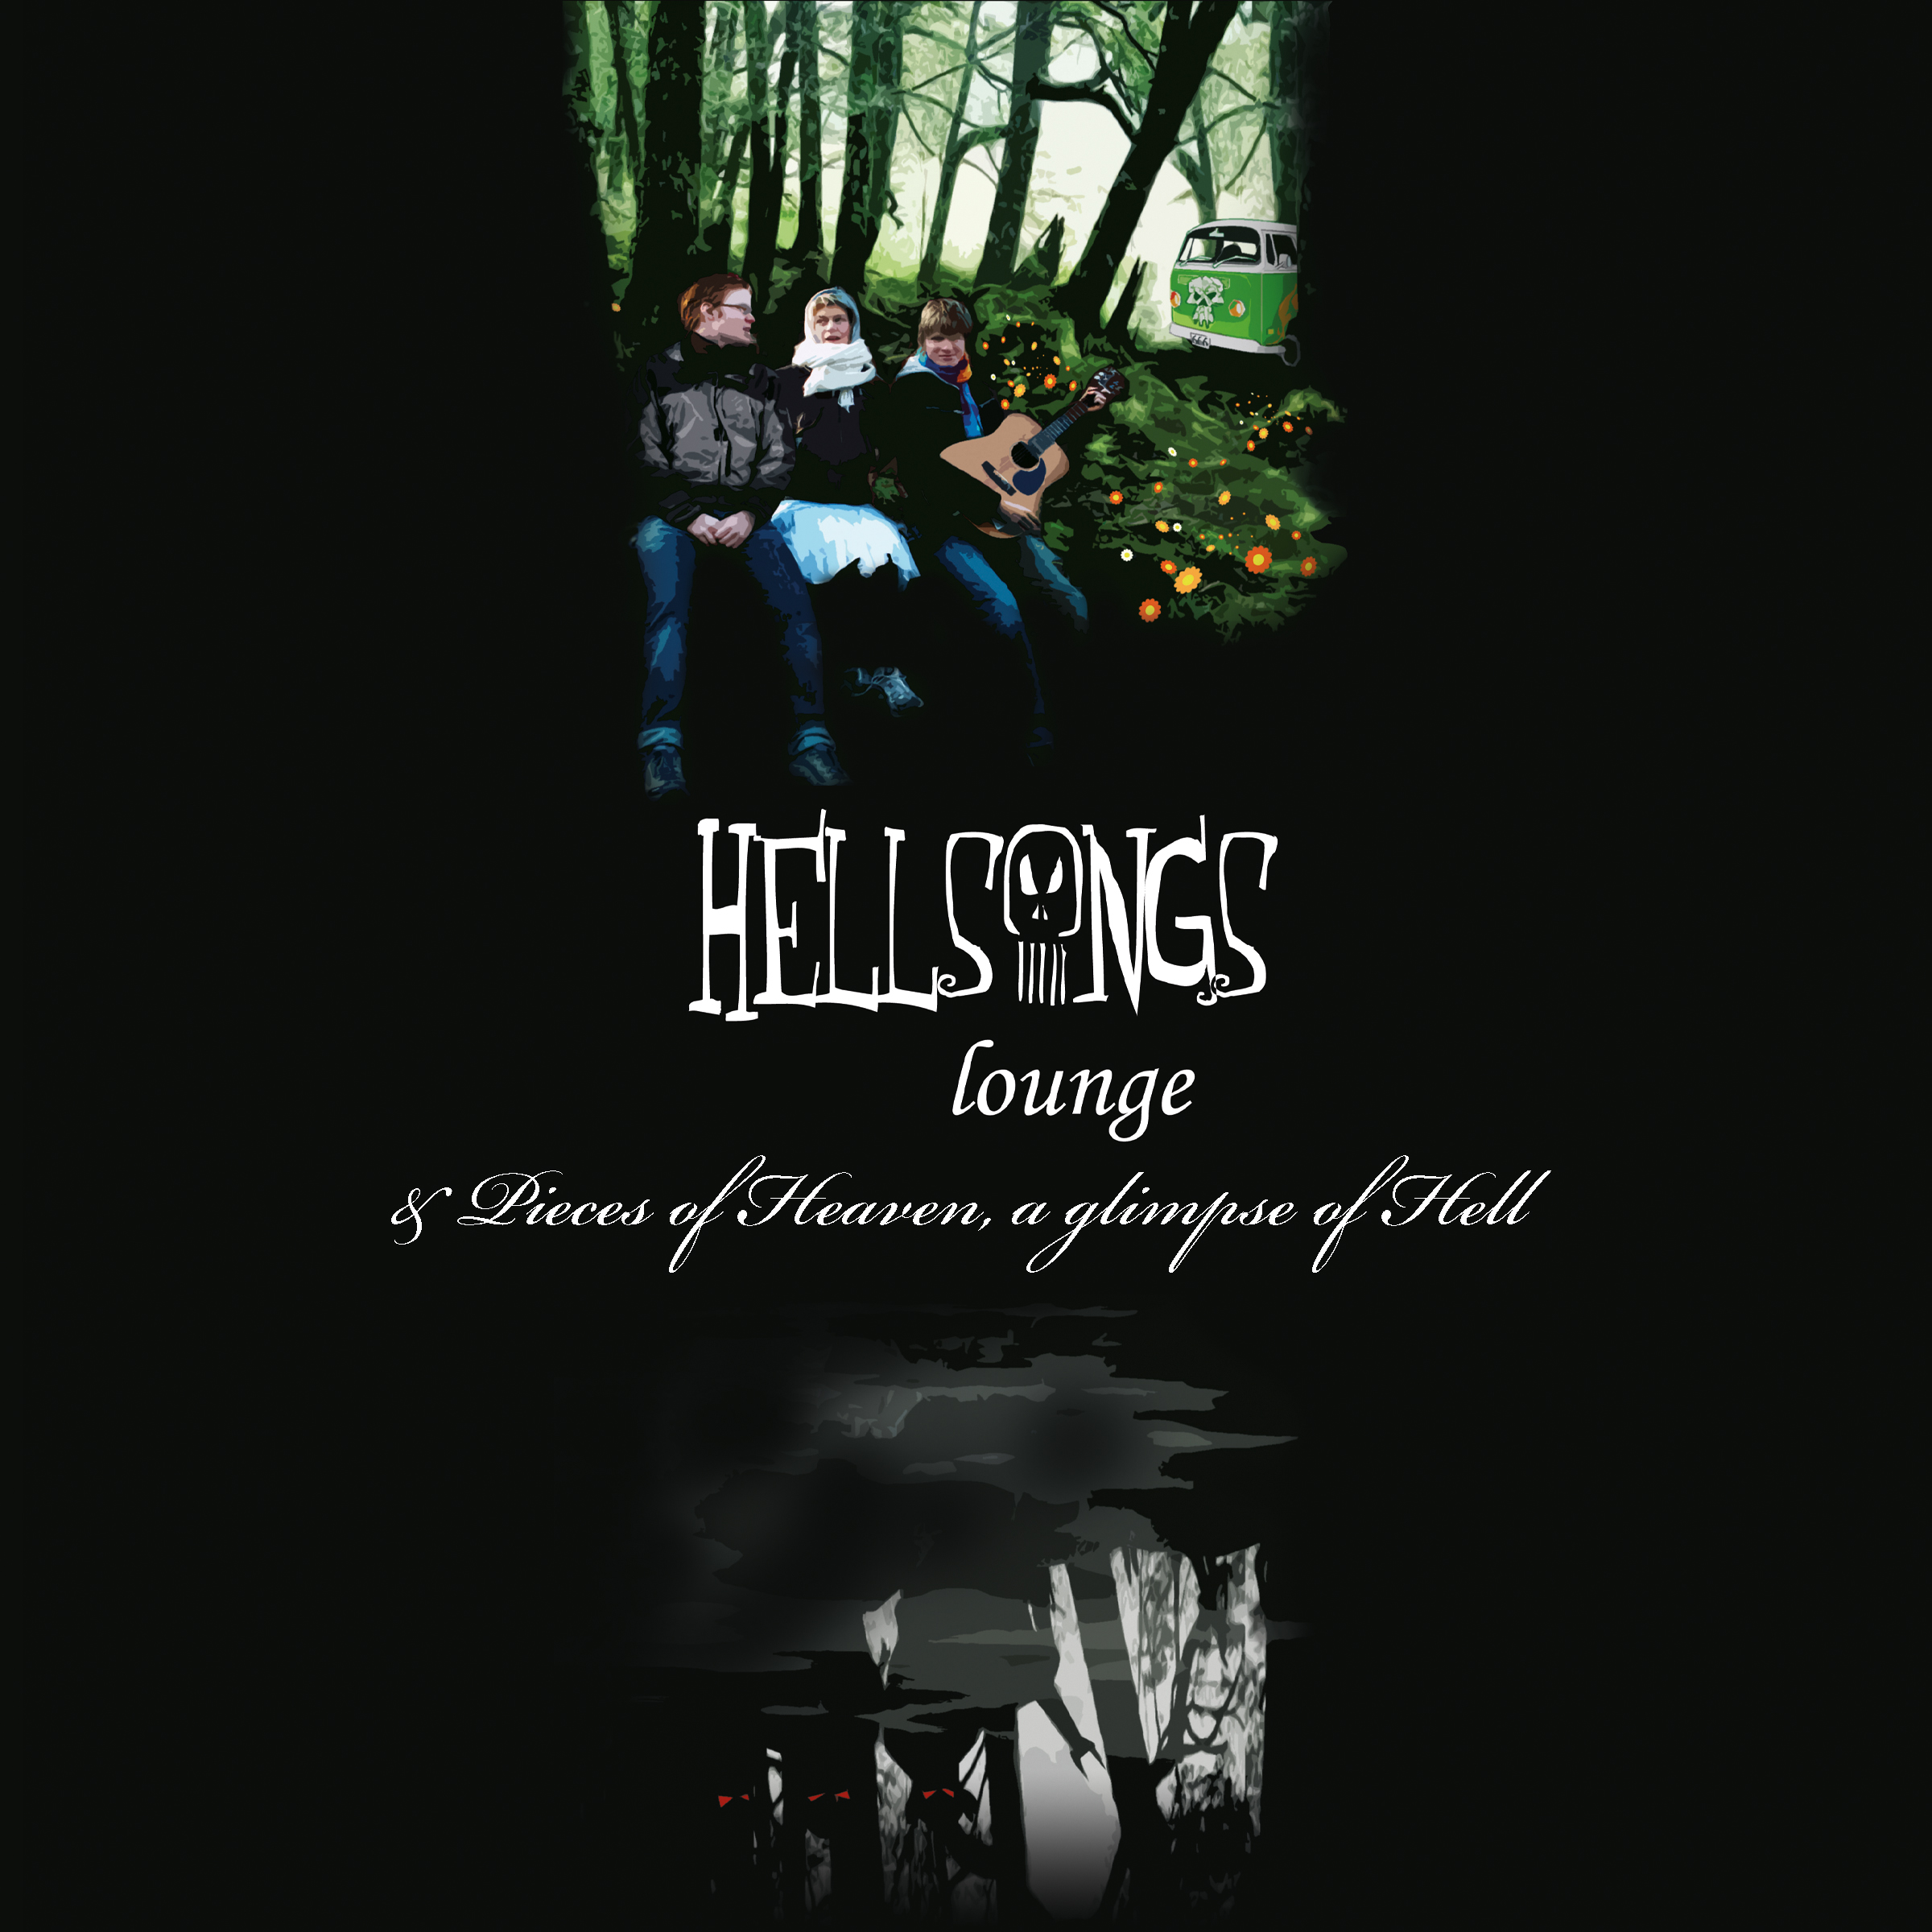 Hellsongs - Lounge / Pieces of Heaven, a glimpse of Hell